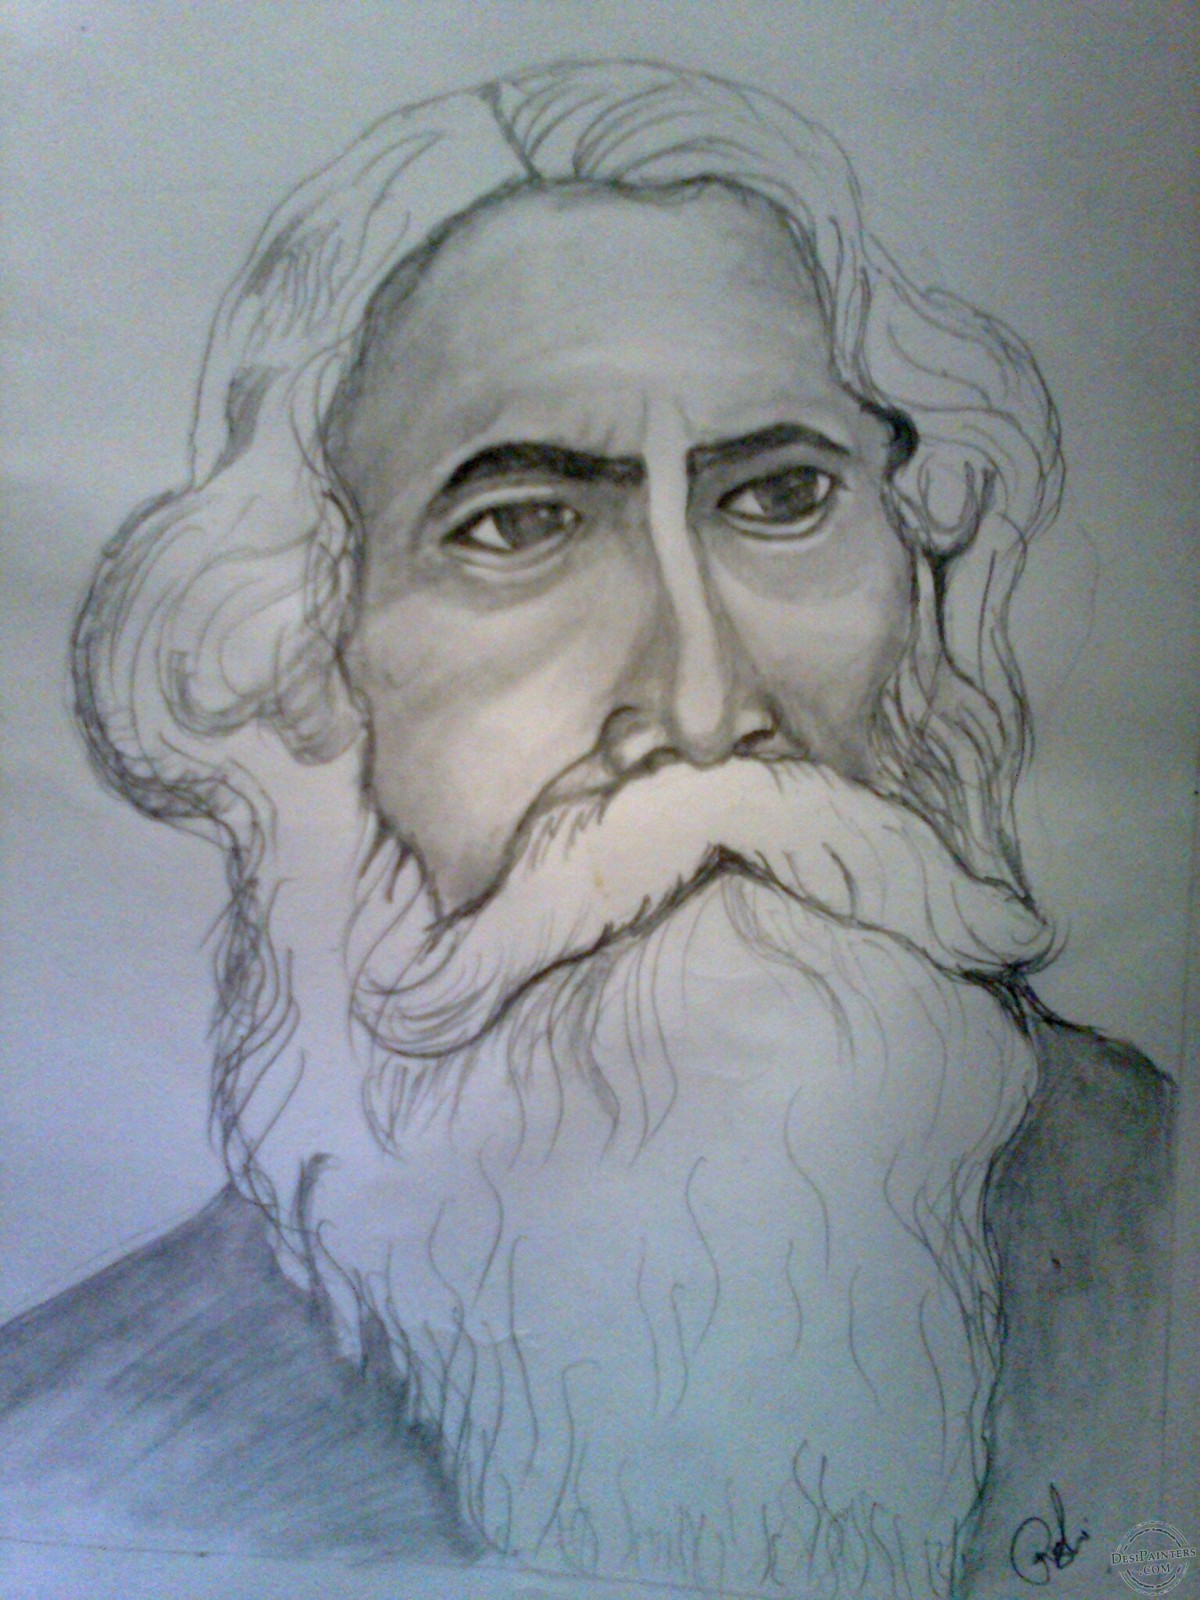 Rabindranath Tagore Drawing by Dhiman Roy - Fine Art America-saigonsouth.com.vn